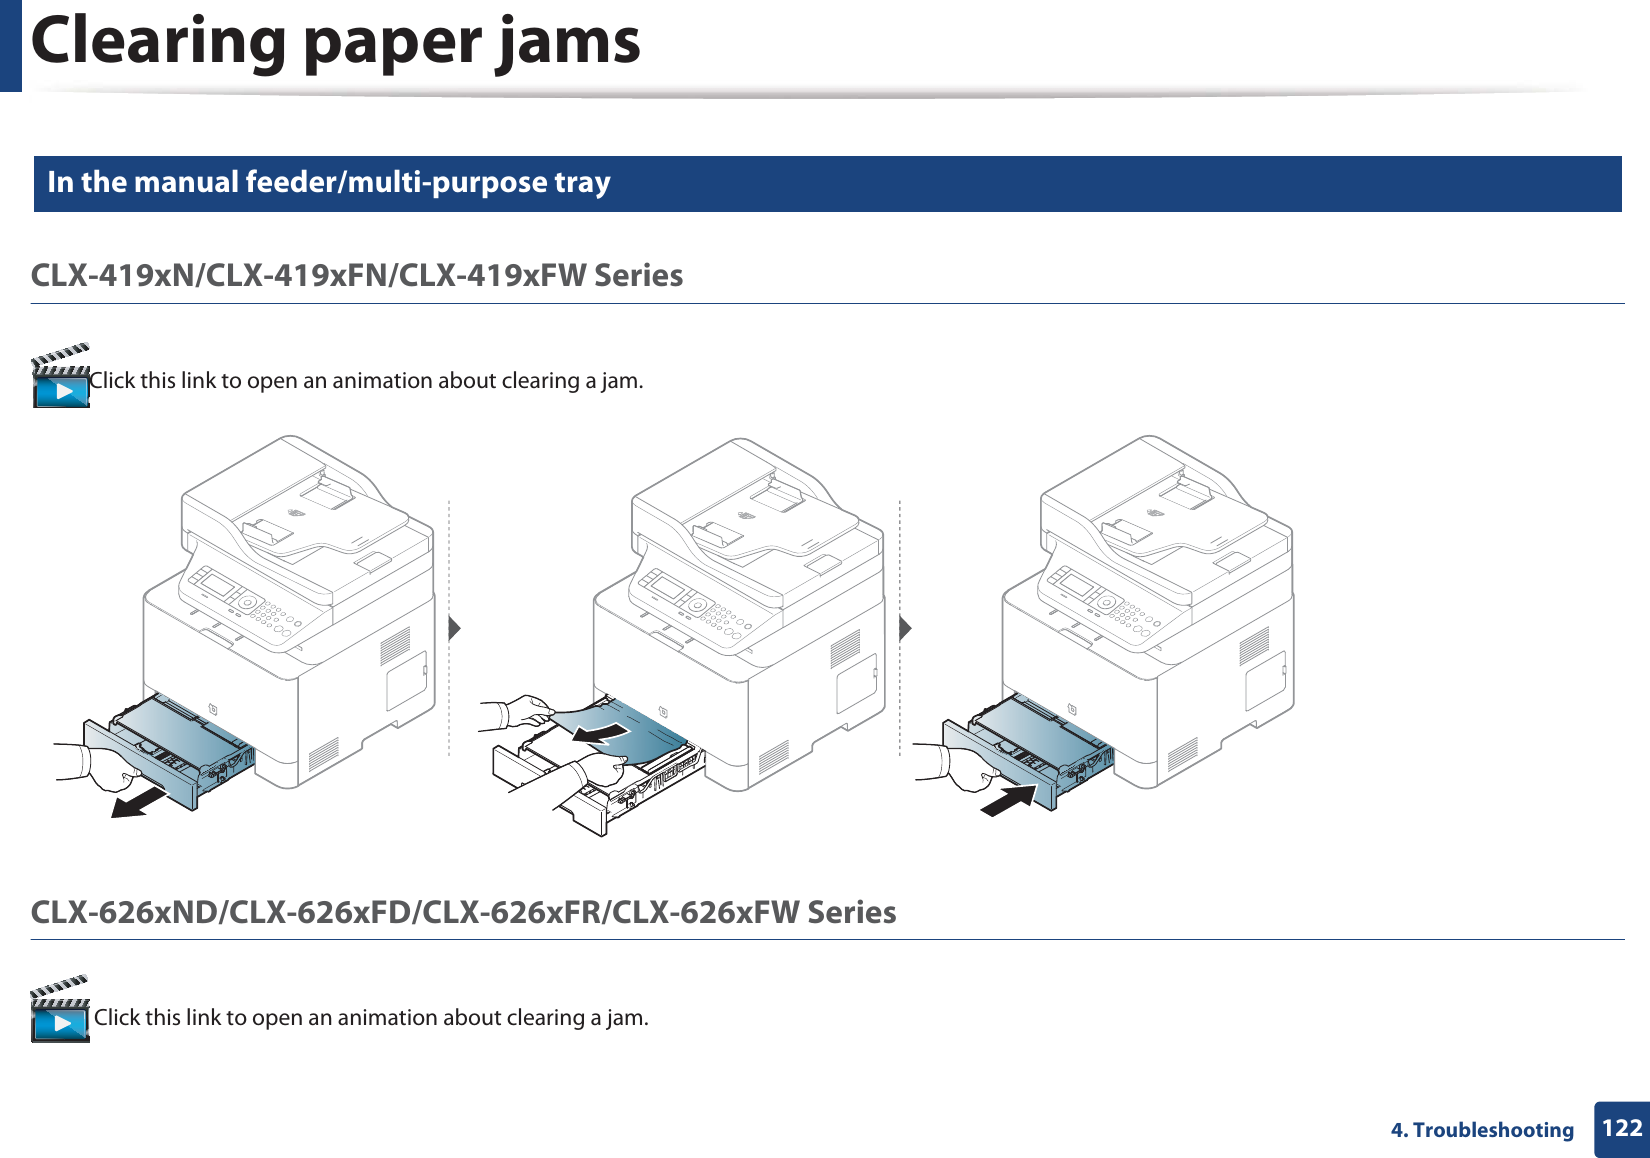 Clearing paper jams1224. Troubleshooting7 In the manual feeder/multi-purpose trayCLX-419xN/CLX-419xFN/CLX-419xFW SeriesClick this link to open an animation about clearing a jam.CLX-626xND/CLX-626xFD/CLX-626xFR/CLX-626xFW Series  Click this link to open an animation about clearing a jam.